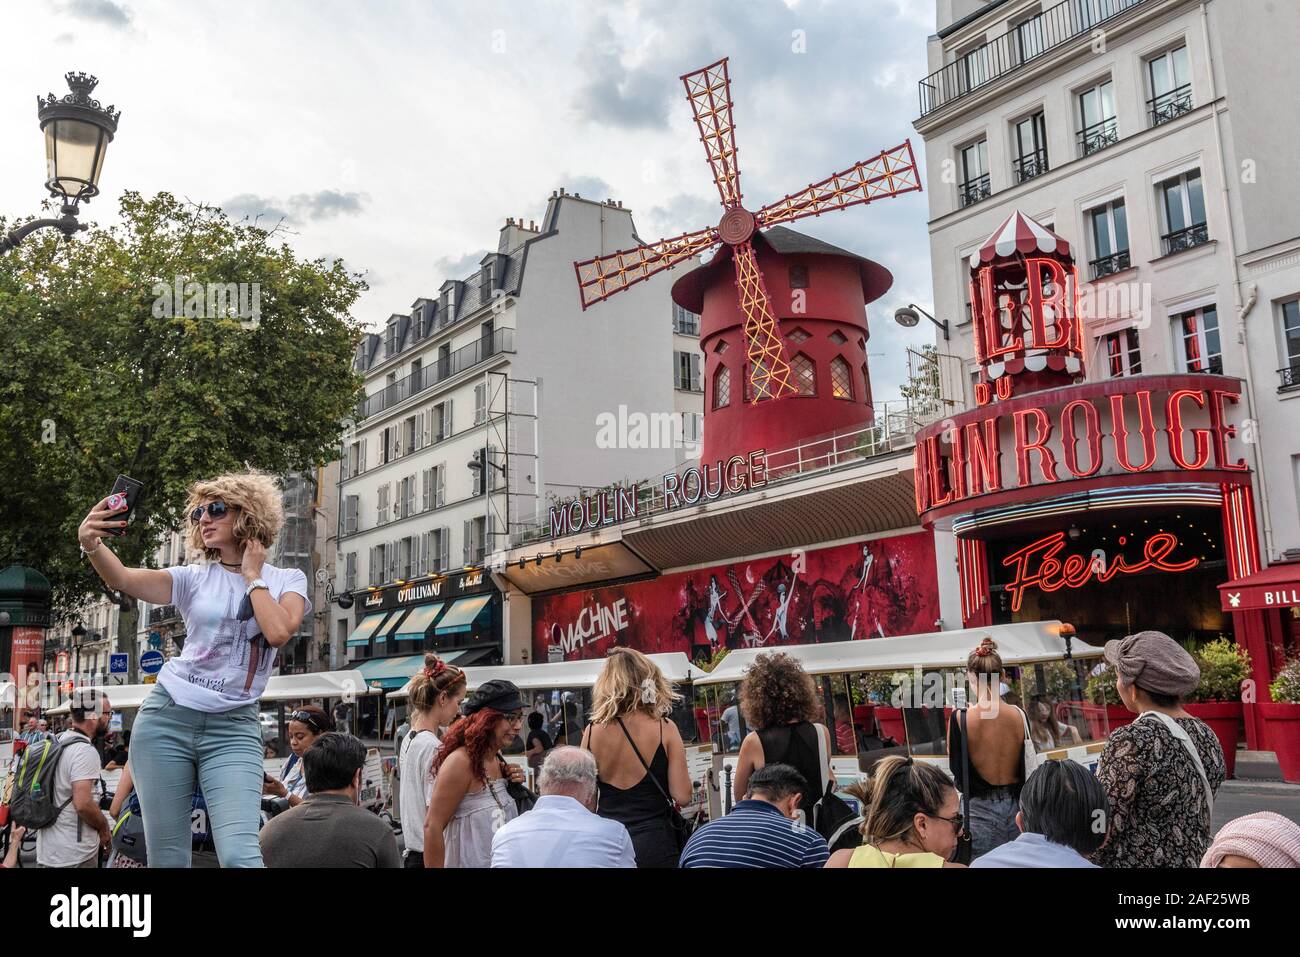 Paris (France): atmosphere in the district of Montmartre, tourists taking pictures in front of the Moulin Rouge cabaret. Young woman taking a selfie Stock Photo